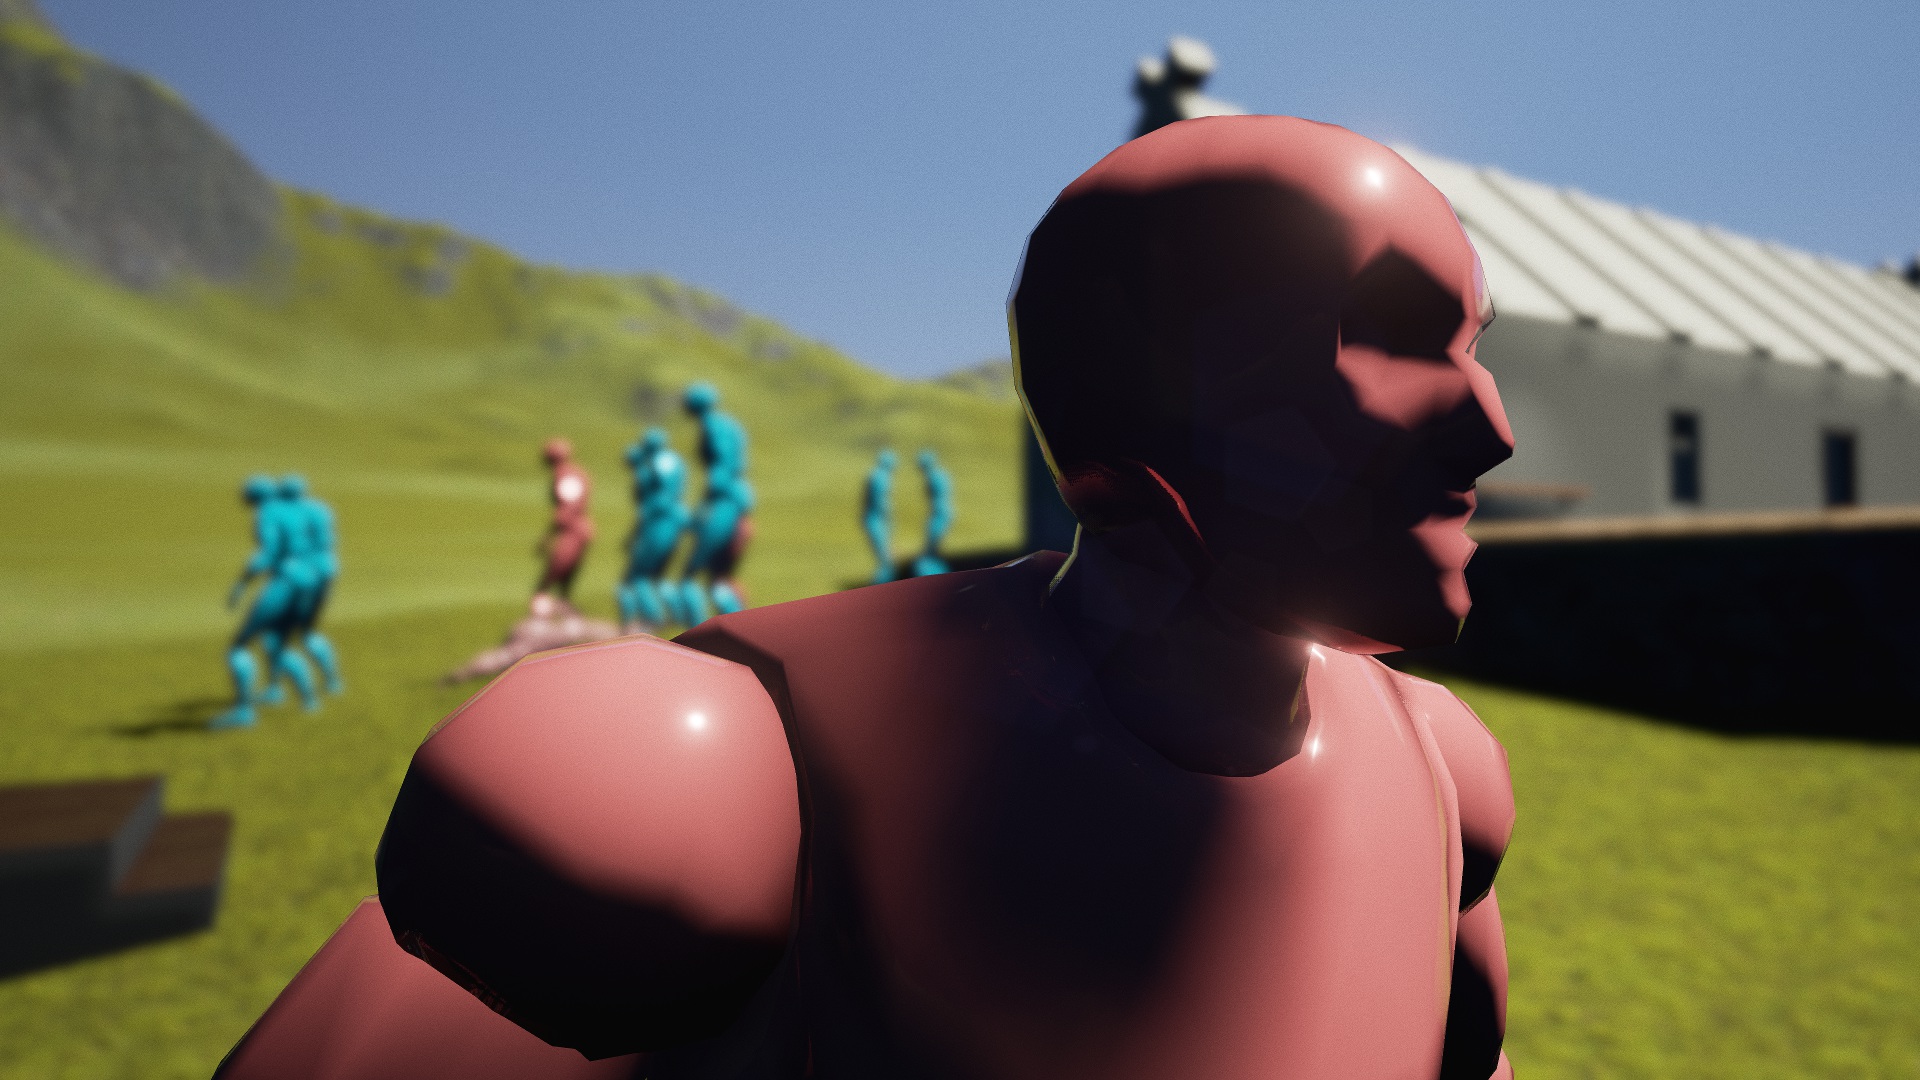 The new Depth of Field effect at its maximum strength